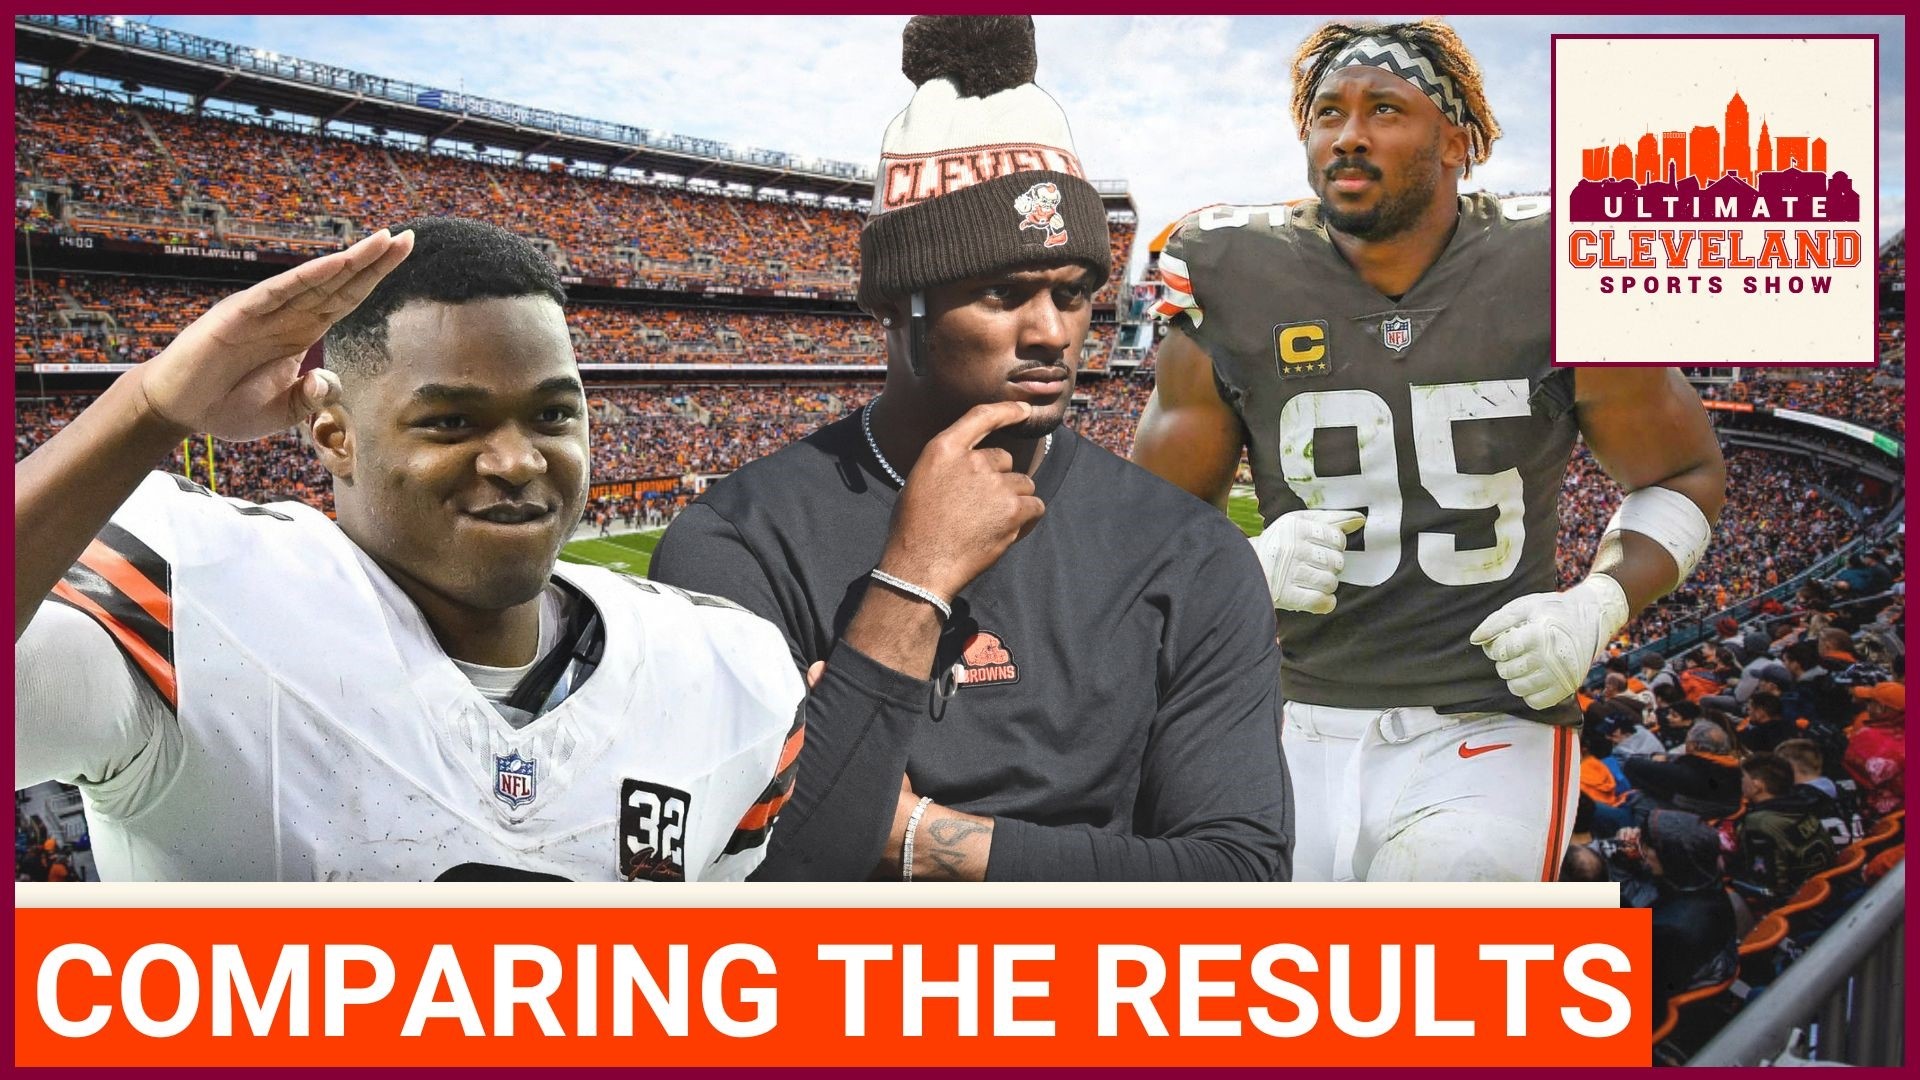 The Move the Sticks podcast released their thoughts on the Cleveland Browns roster. UCSS compares our thoughts on the Cleveland Browns roster to theirs - did we get